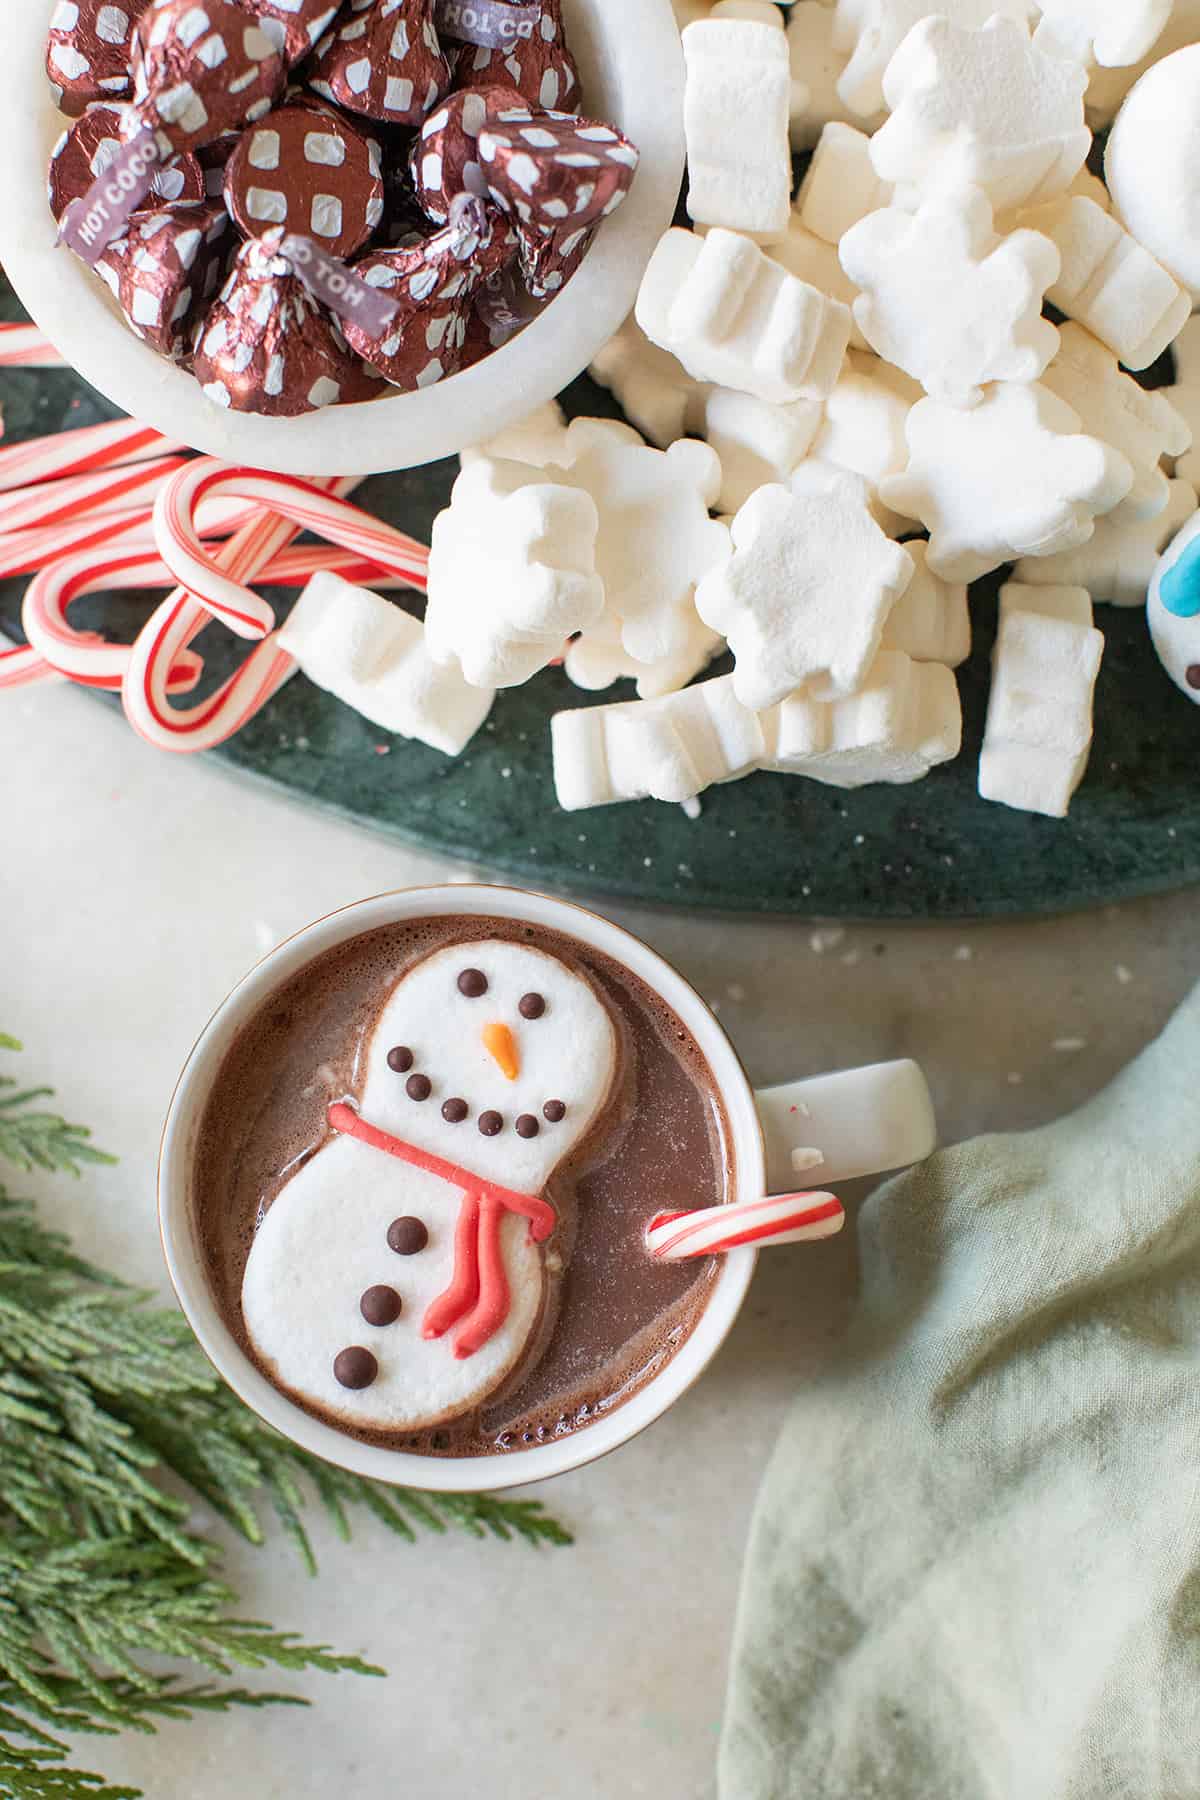 Cup of hot chocolate with a snowman marshmallow on the top.